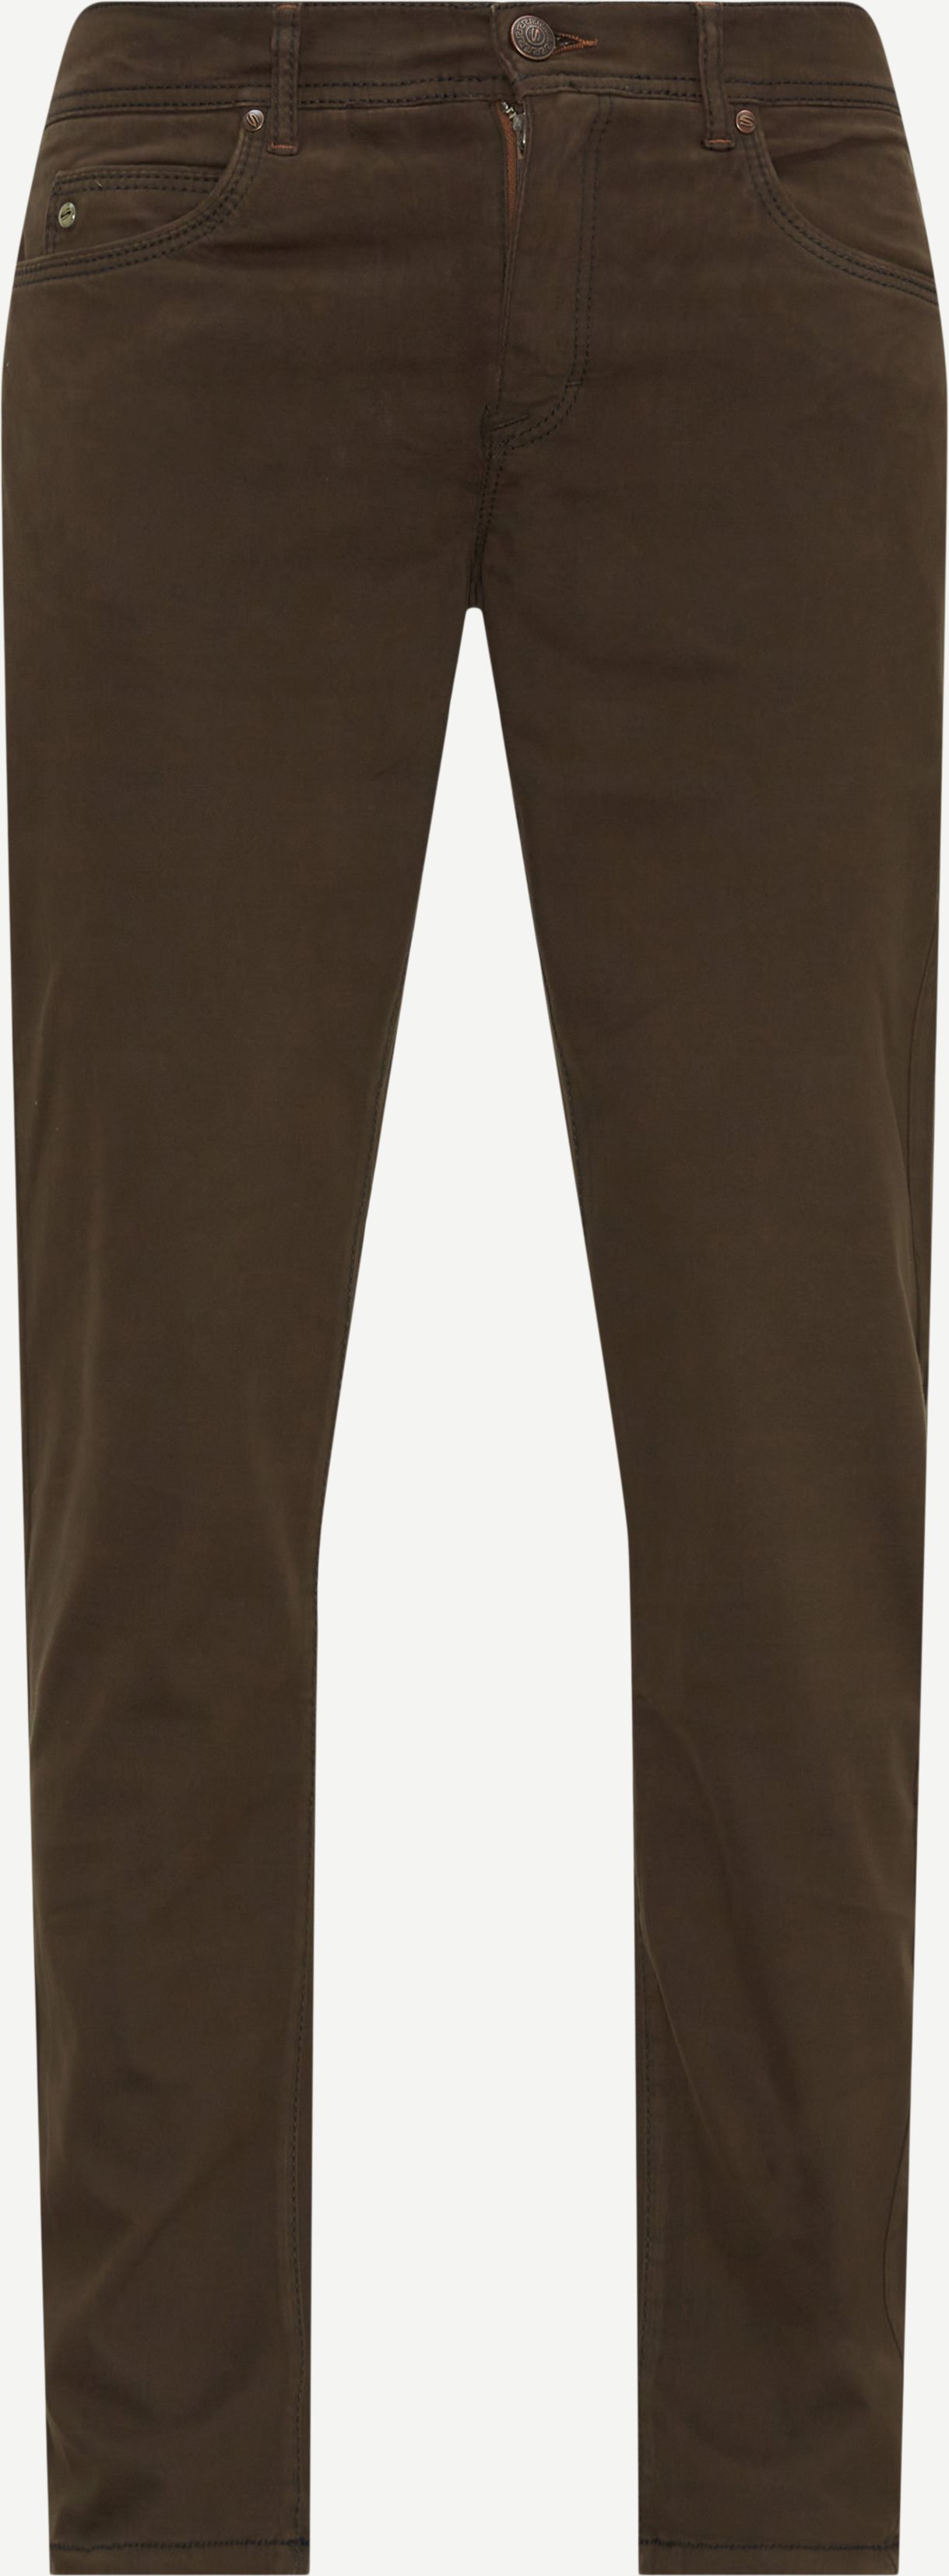 Sand Jeans SUEDE TOUCH BURTON N 2303 Brown